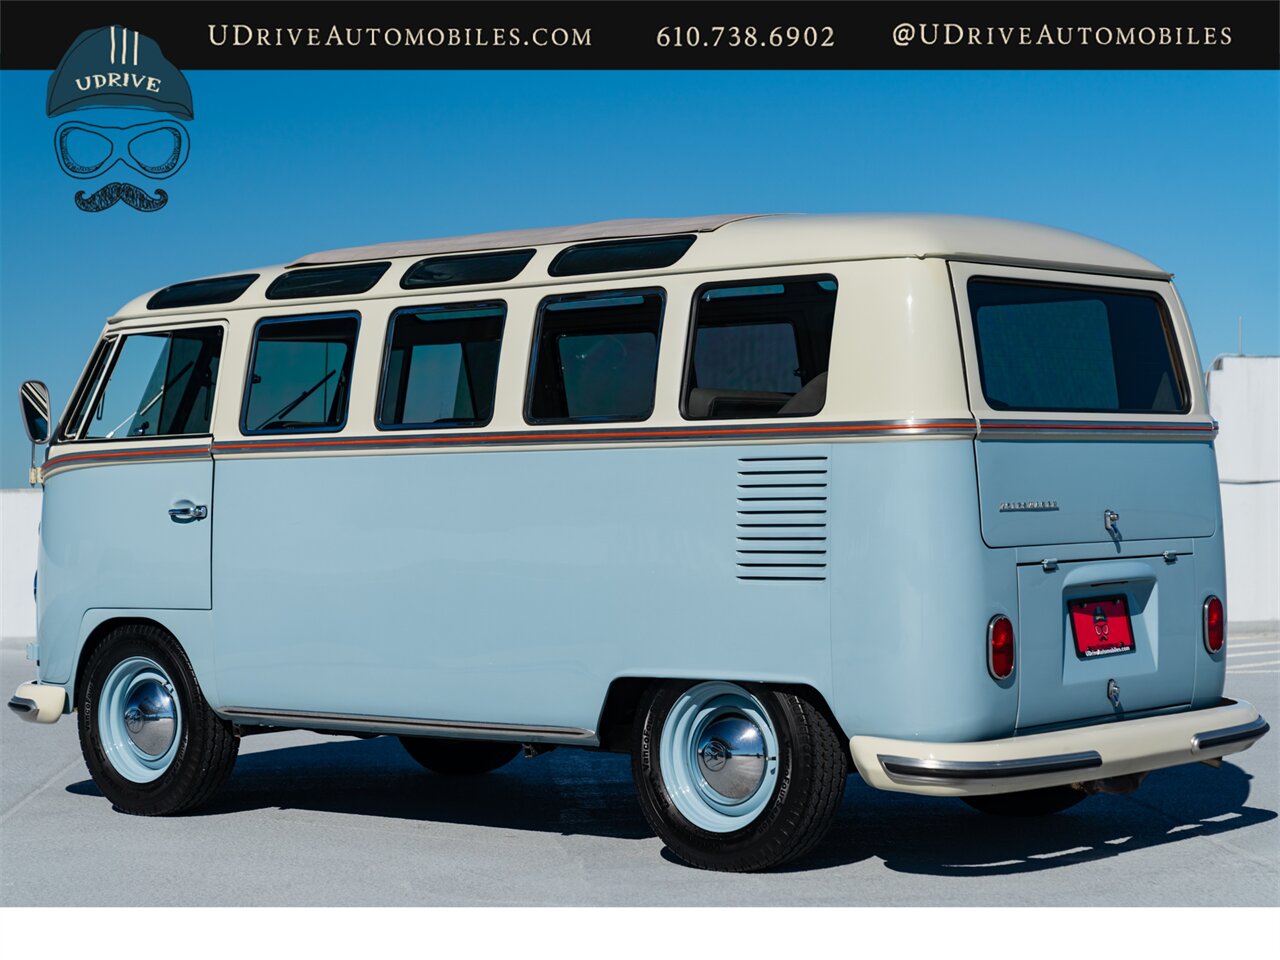 1965 Volkswagen Bus/Vanagon 21 Window Deluxe Transporter  Built By East Coast VW Restorations 1914cc A/C - Photo 23 - West Chester, PA 19382